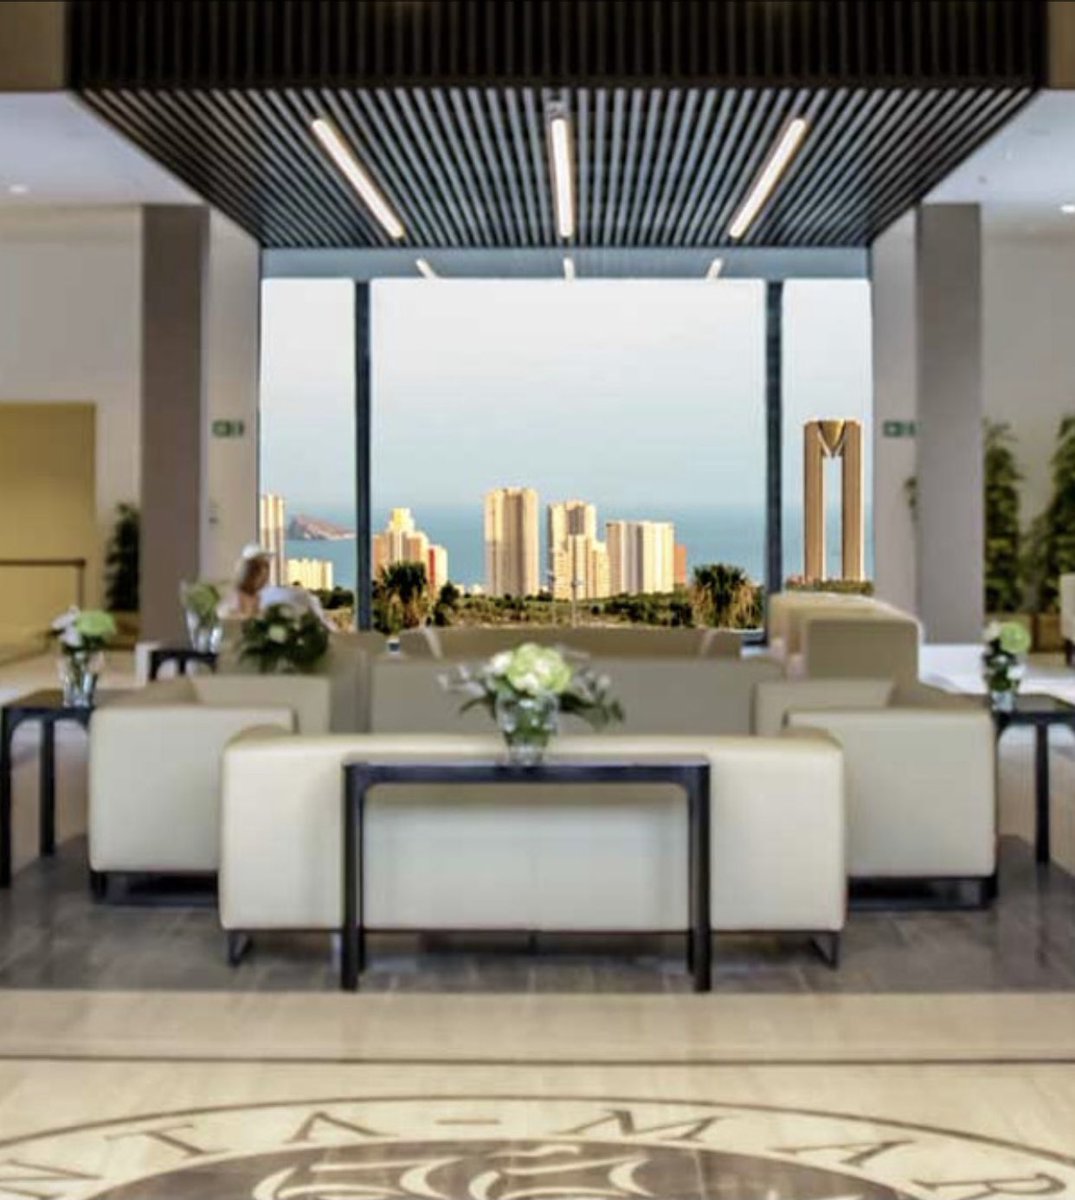 The @grandluxorhotel in the mountains overlooking the sea and Benidorm is opening next week in July! It has fantastic conference facilities, a theme park and lots of fun entertainment! A magnificent resort very near to Alicante ! What’s not to like? #Benidorm